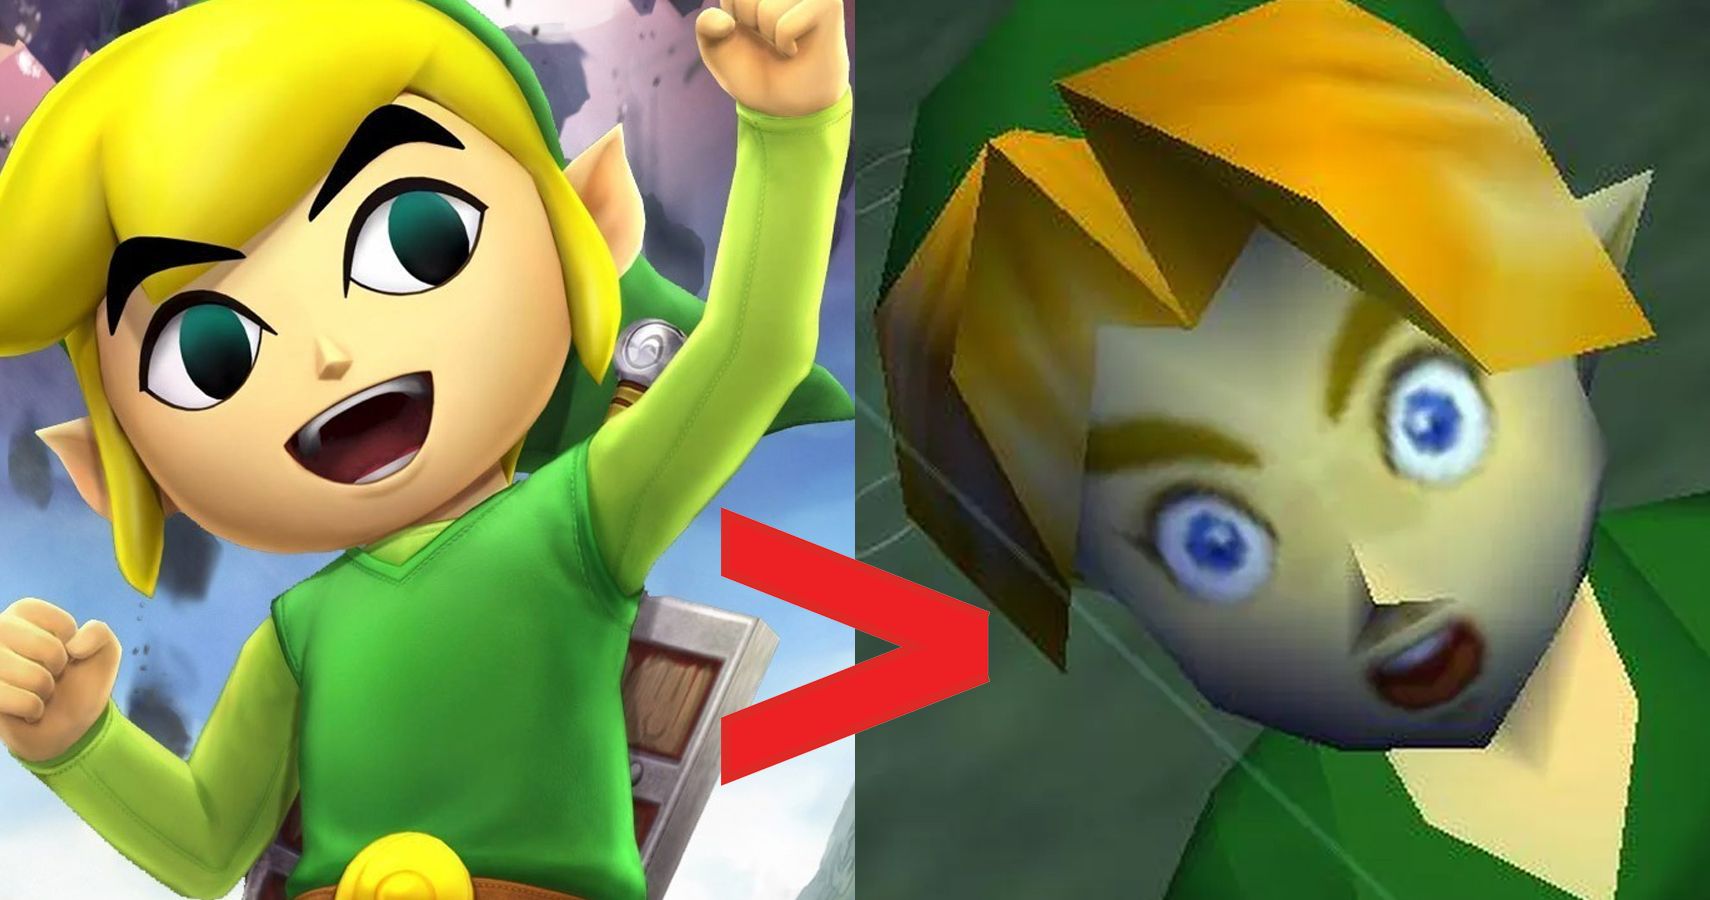 Zelda Theory: How Old is Link in Ocarina of Time and The Wind Waker?